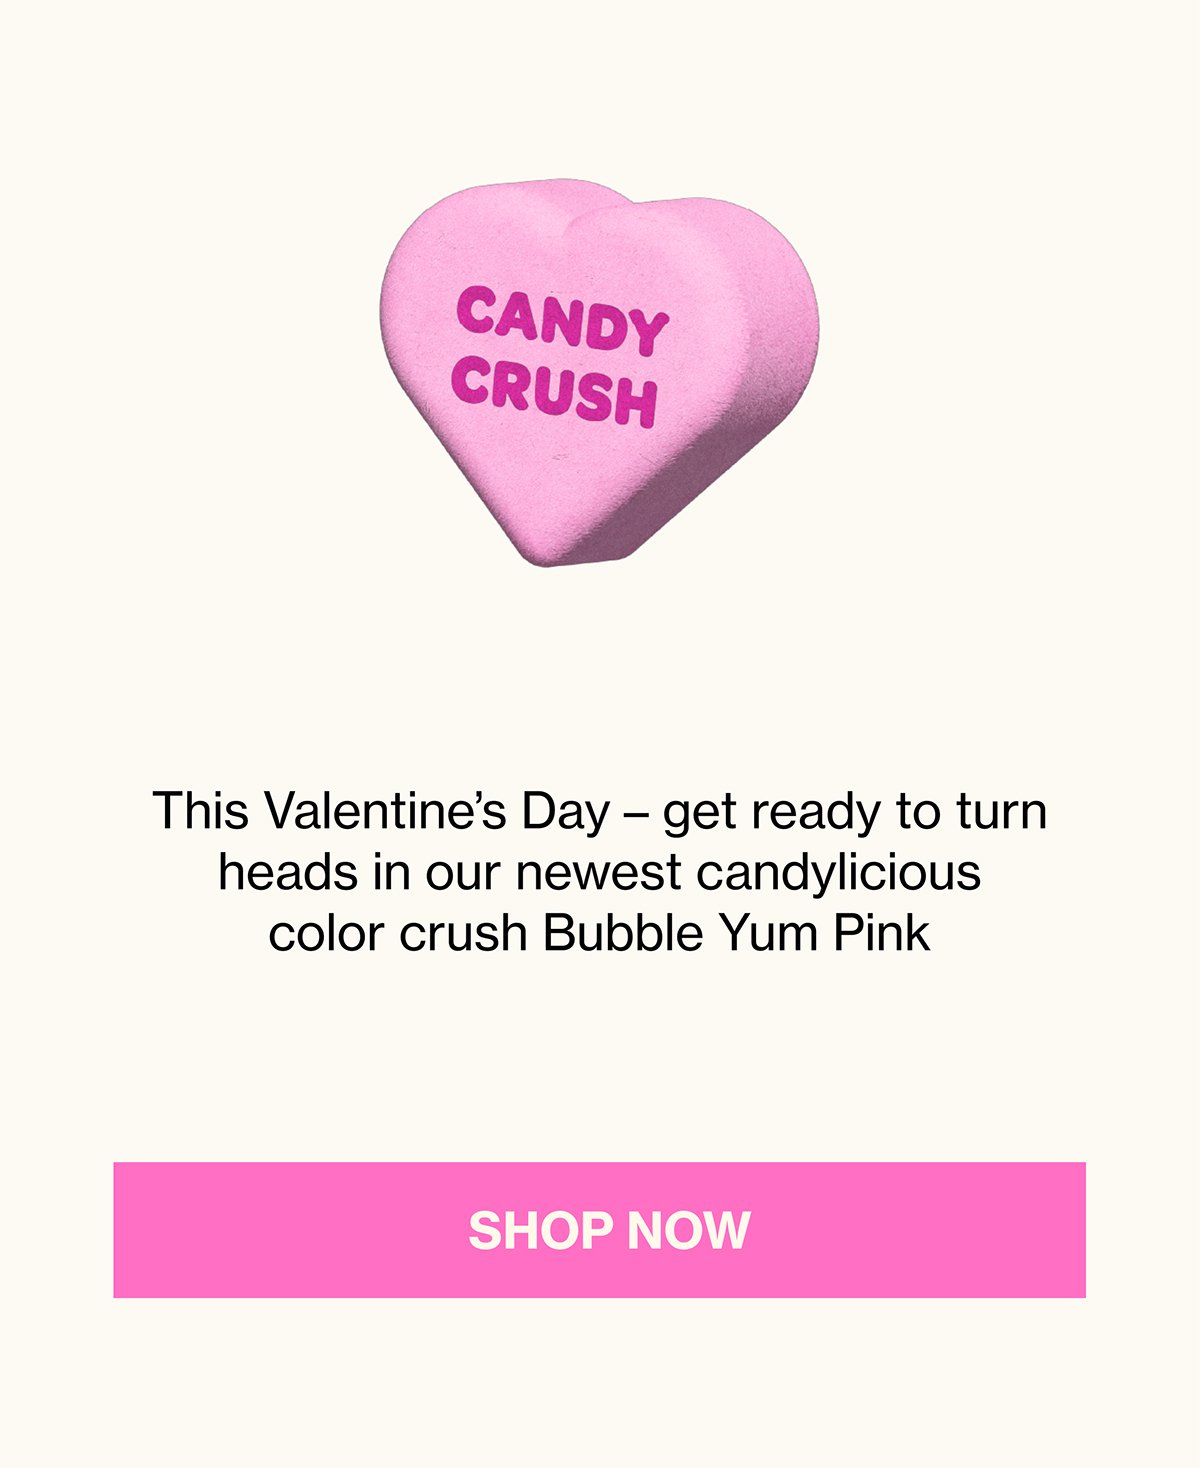 CANDY CRUSH SHOP NOW